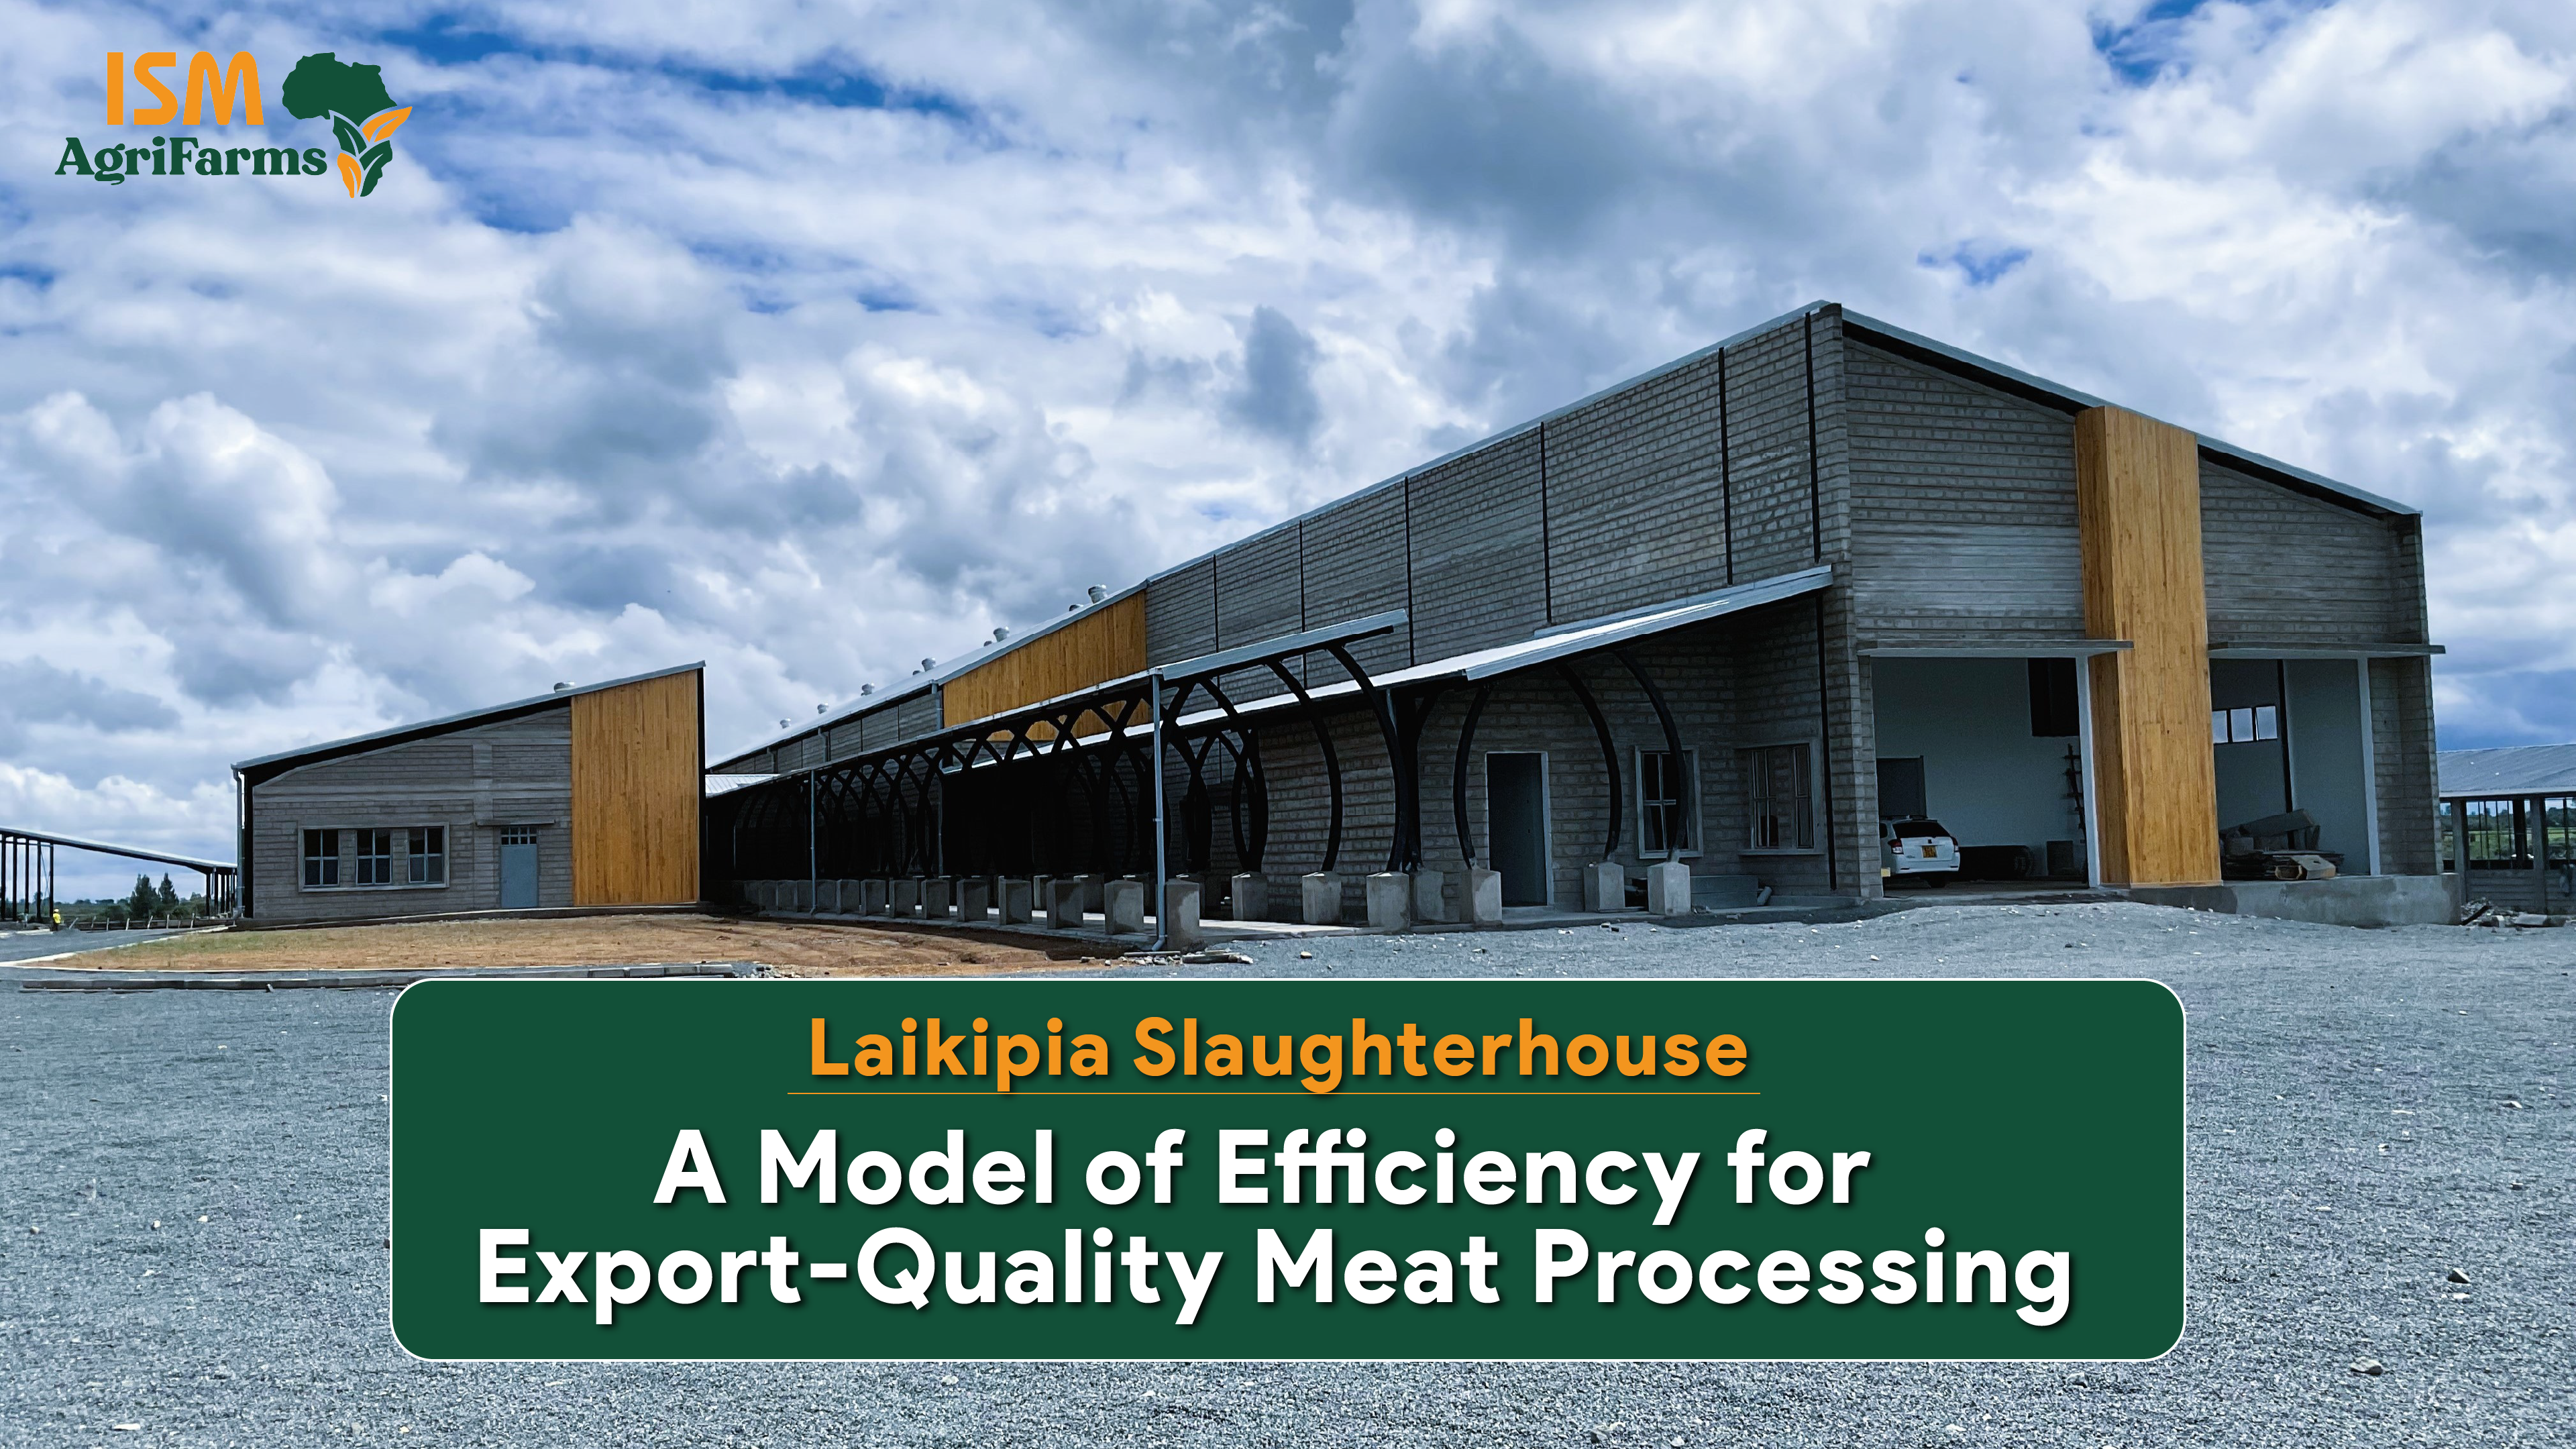 Laikipia Slaughterhouse: A Model of Efficiency for Export-Quality Meat Processing